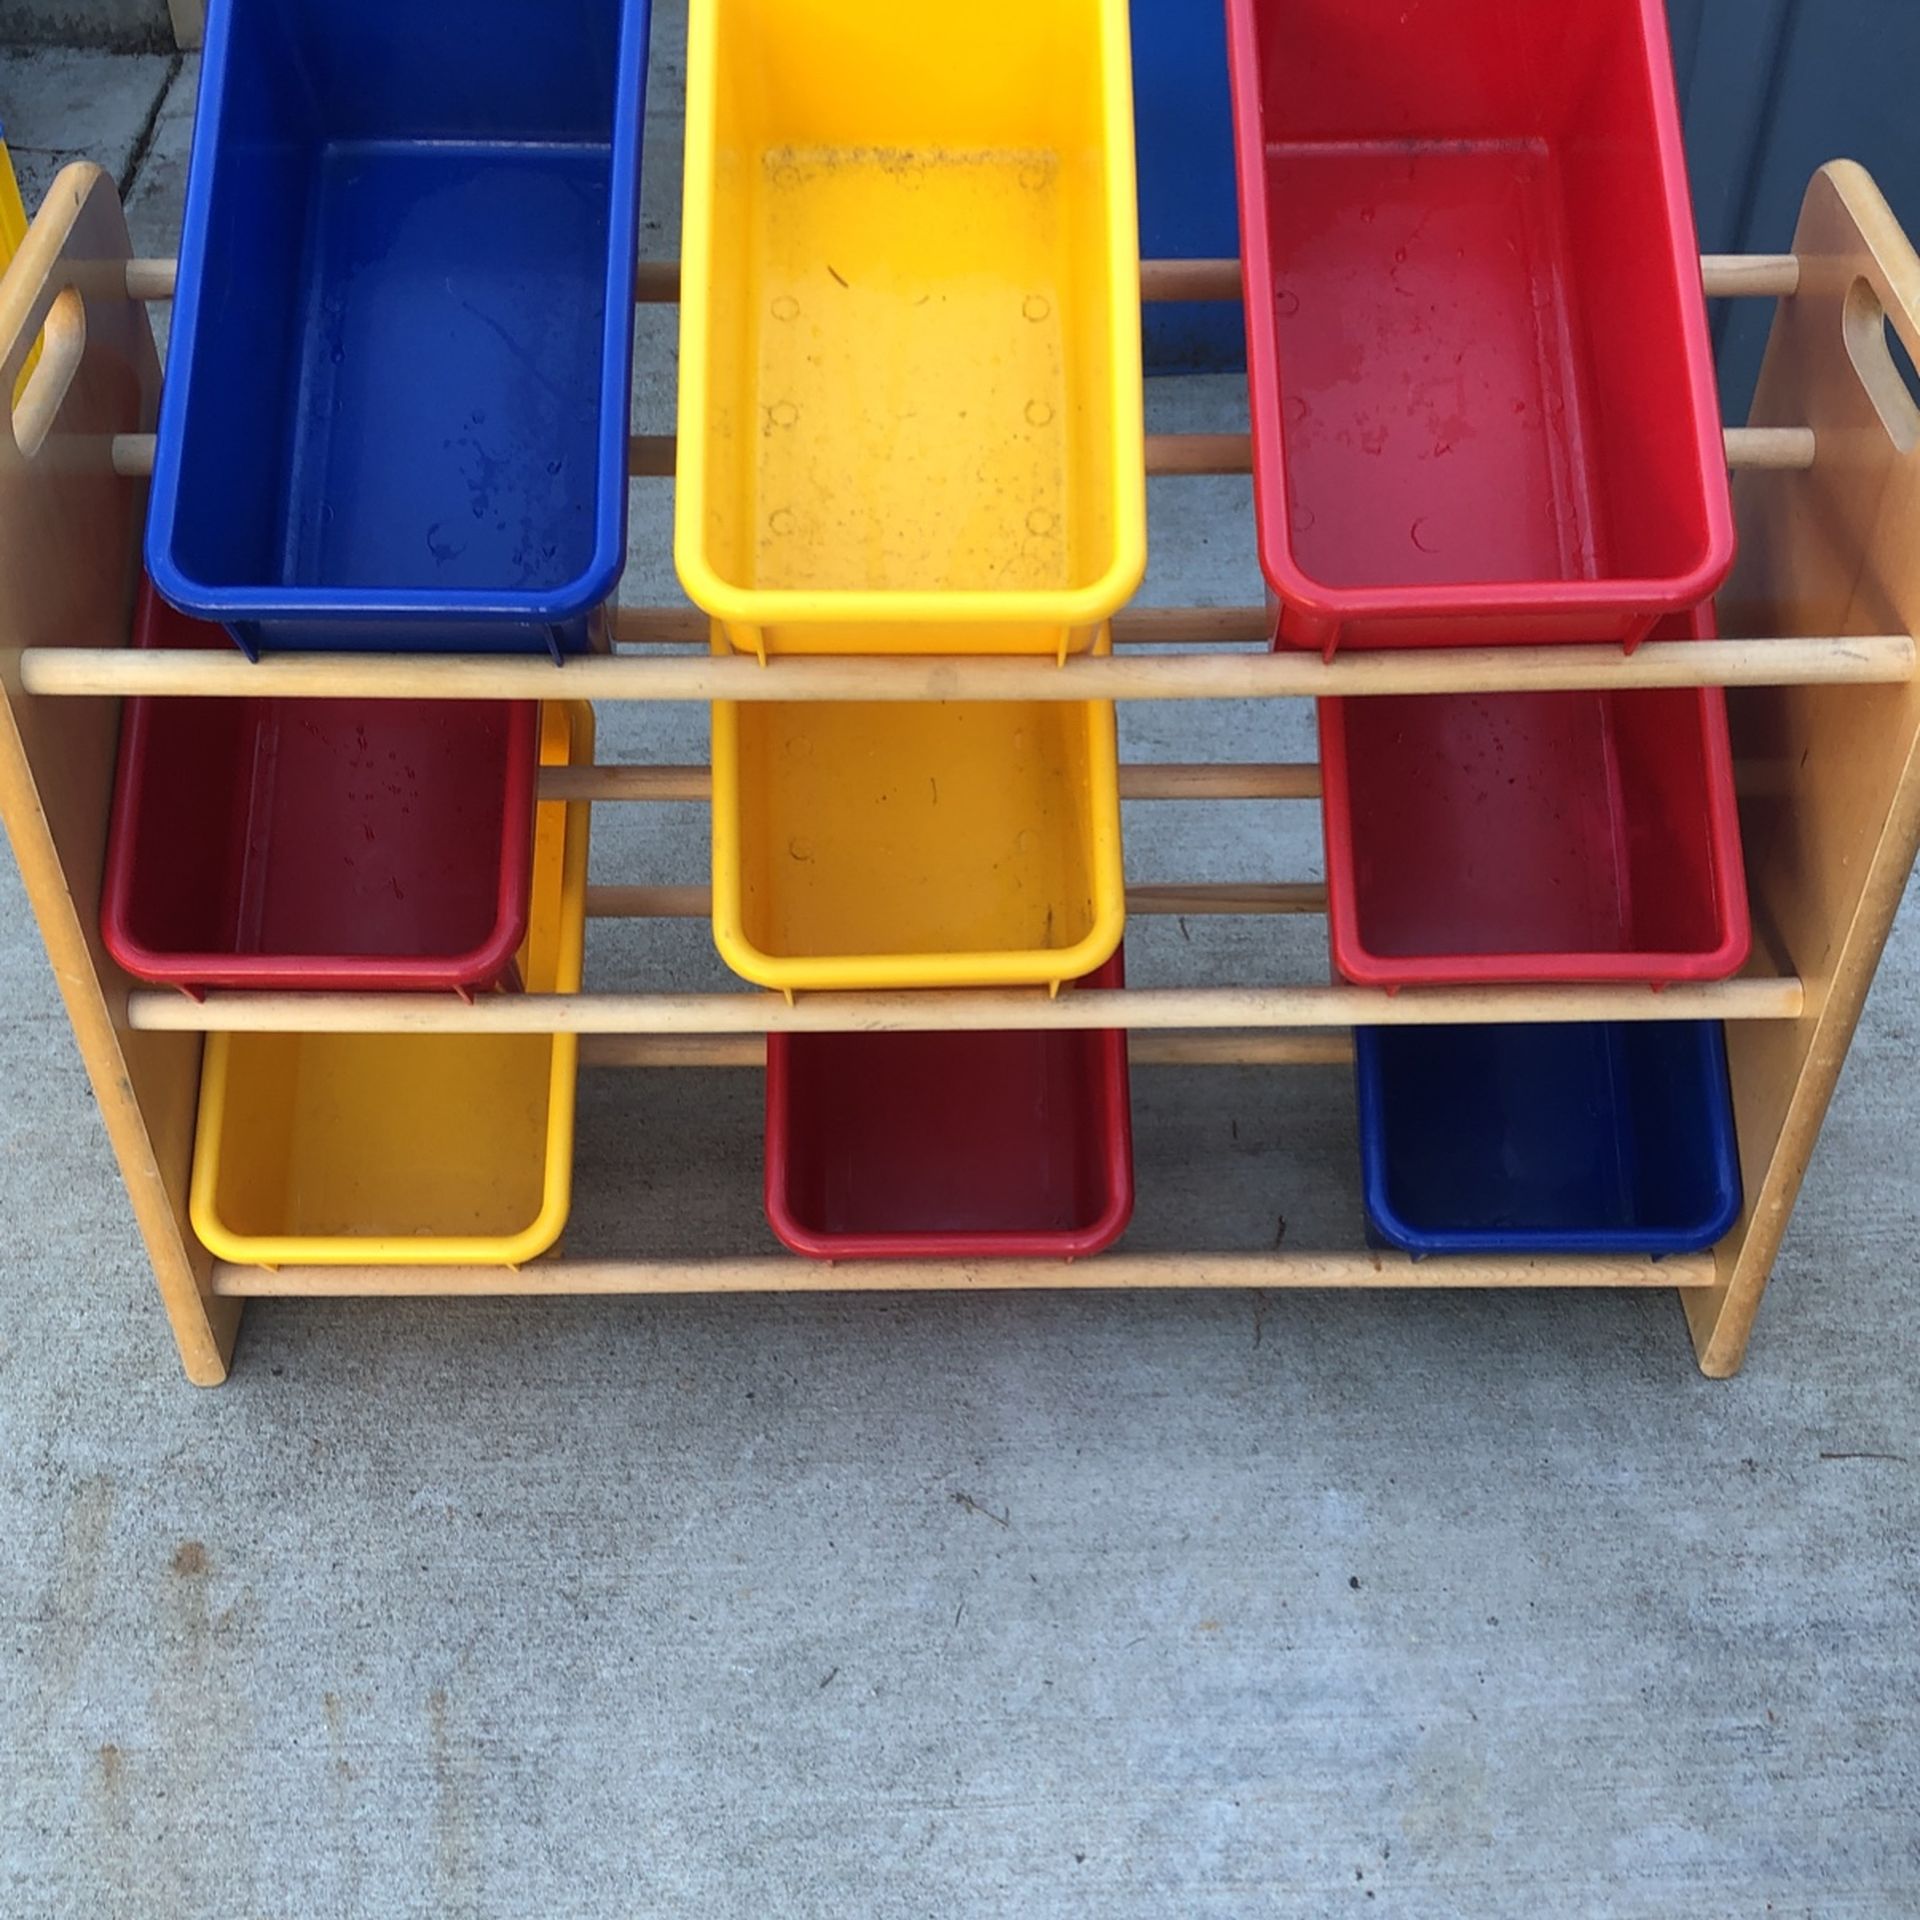 Movable bin style toy box